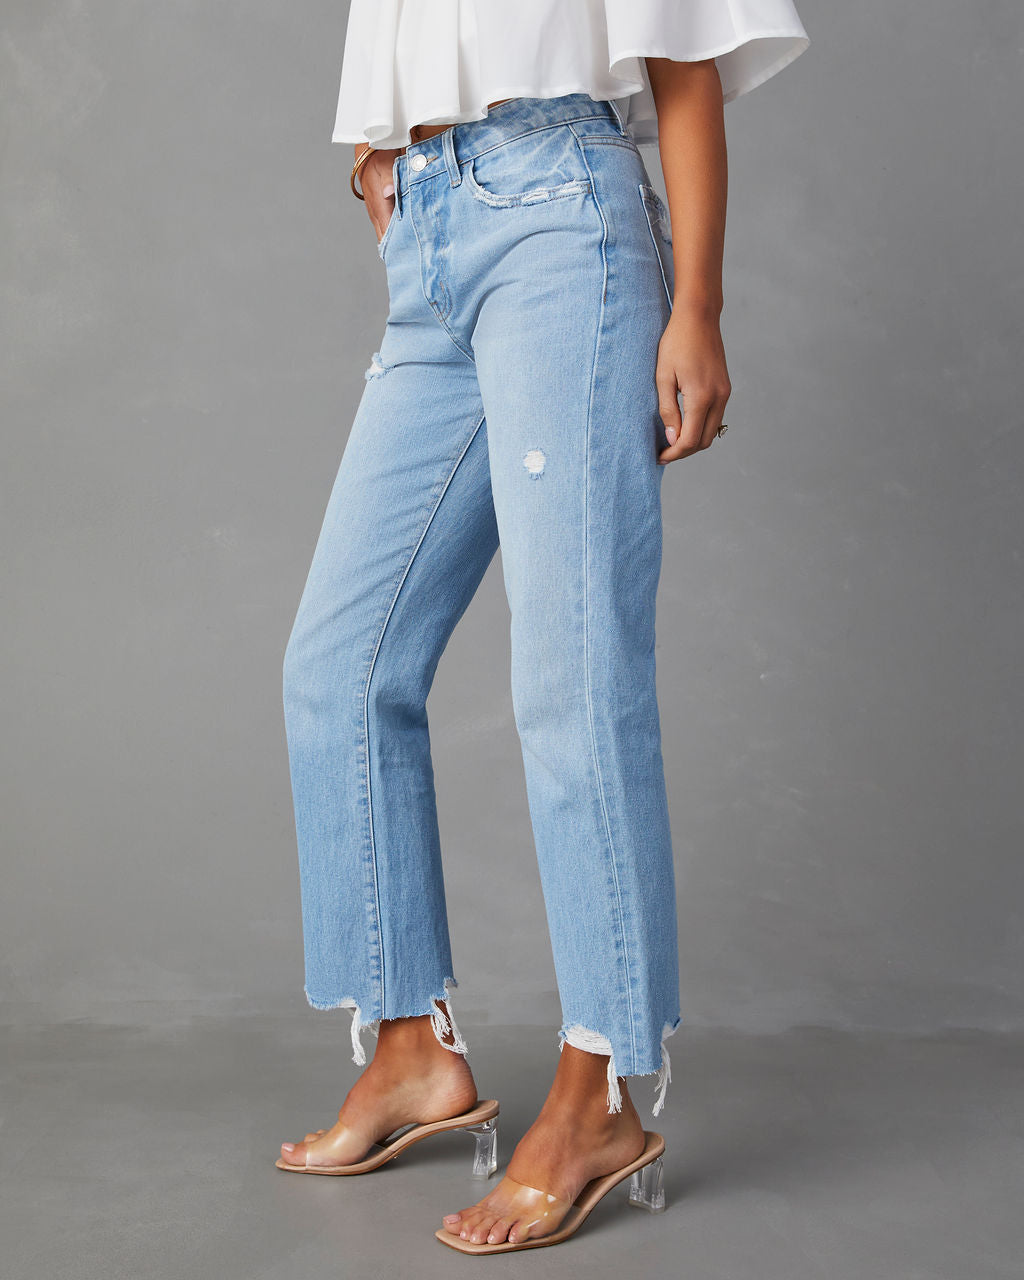 Now High Rise Cross Over Two Tone Straight Jeans – VICI